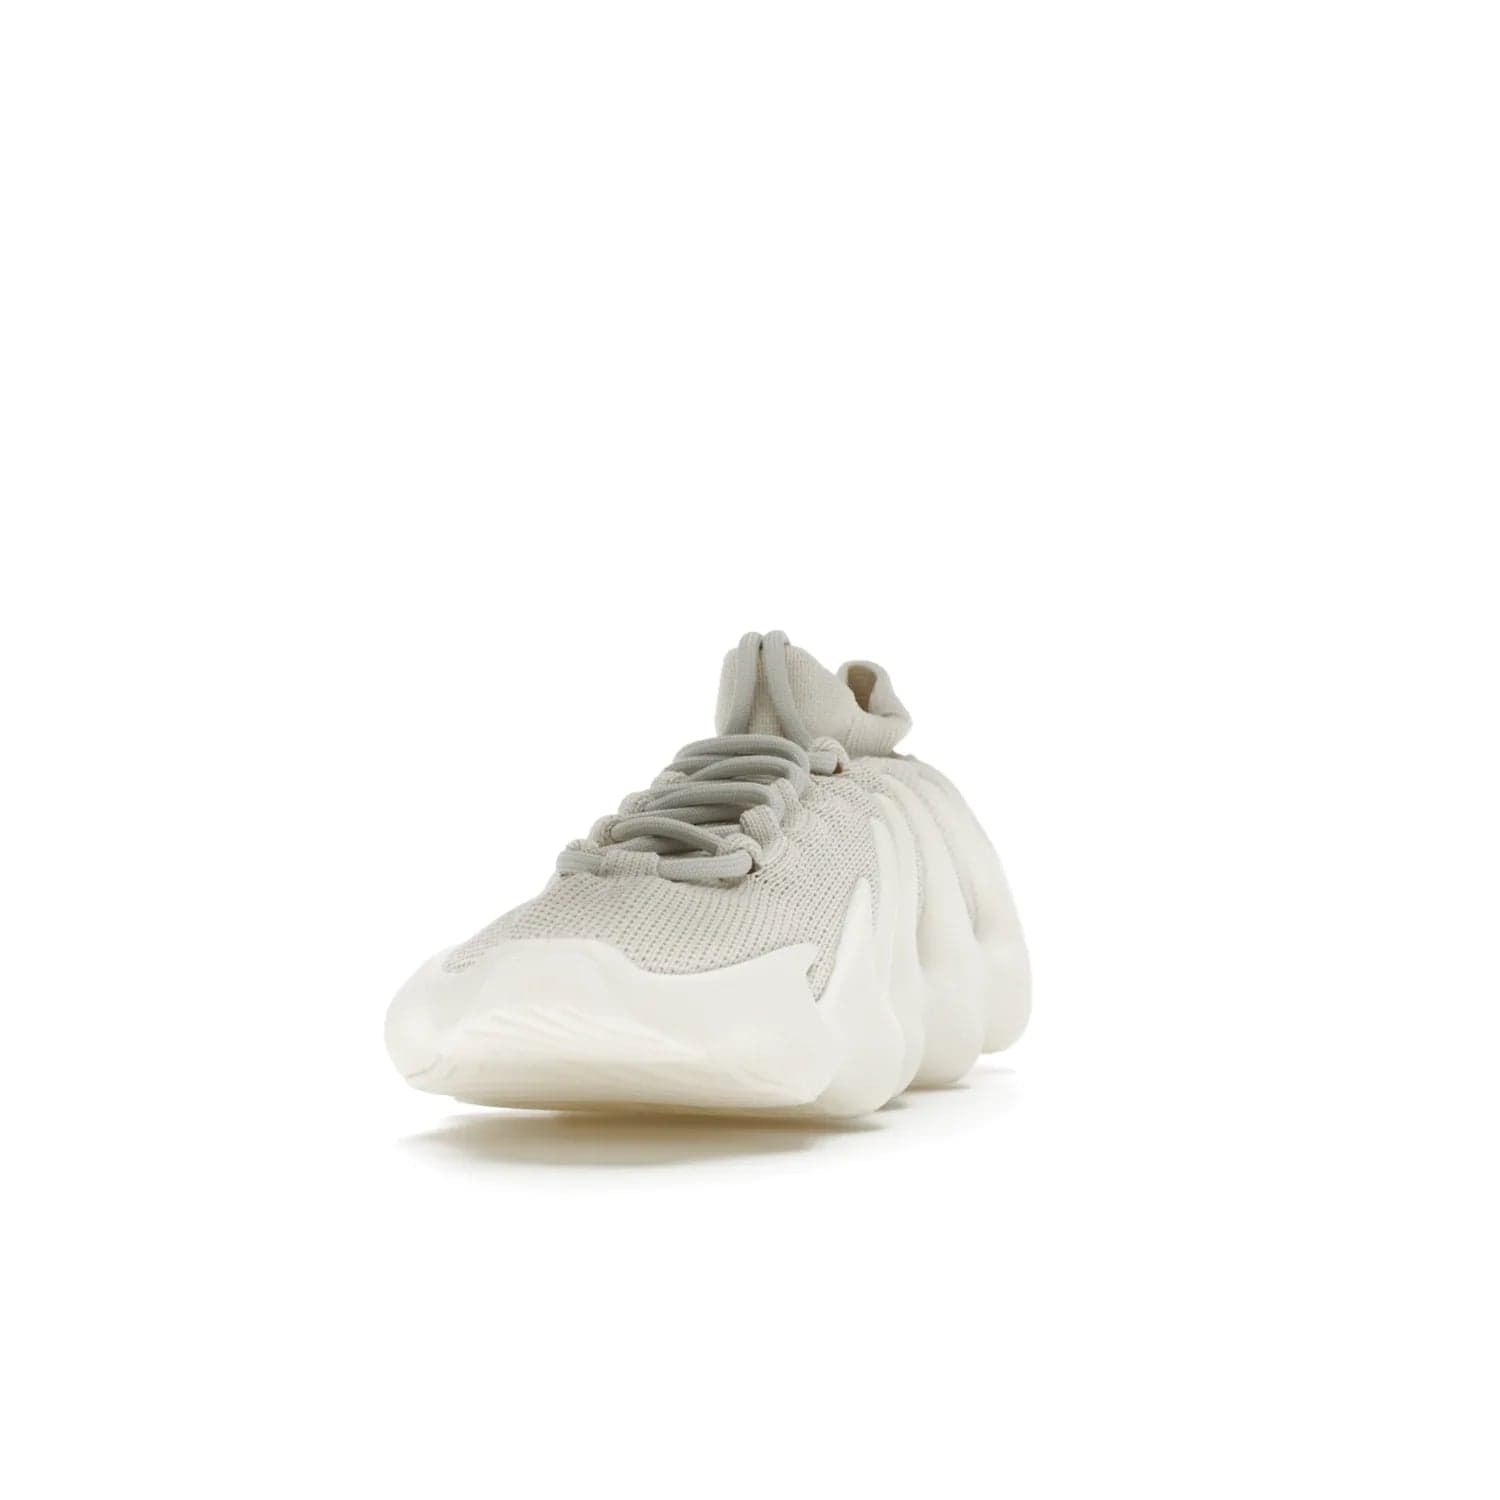 adidas Yeezy 450 Cloud White - Image 12 - Only at www.BallersClubKickz.com - Experience the future with the adidas Yeezy 450 Cloud White. A two-piece design featuring an extreme foam sole and mesh upper, this silhouette is expected to release in March 2021. Get your hands on this striking Cloud White/Cloud White colorway and stand out in the crowd.